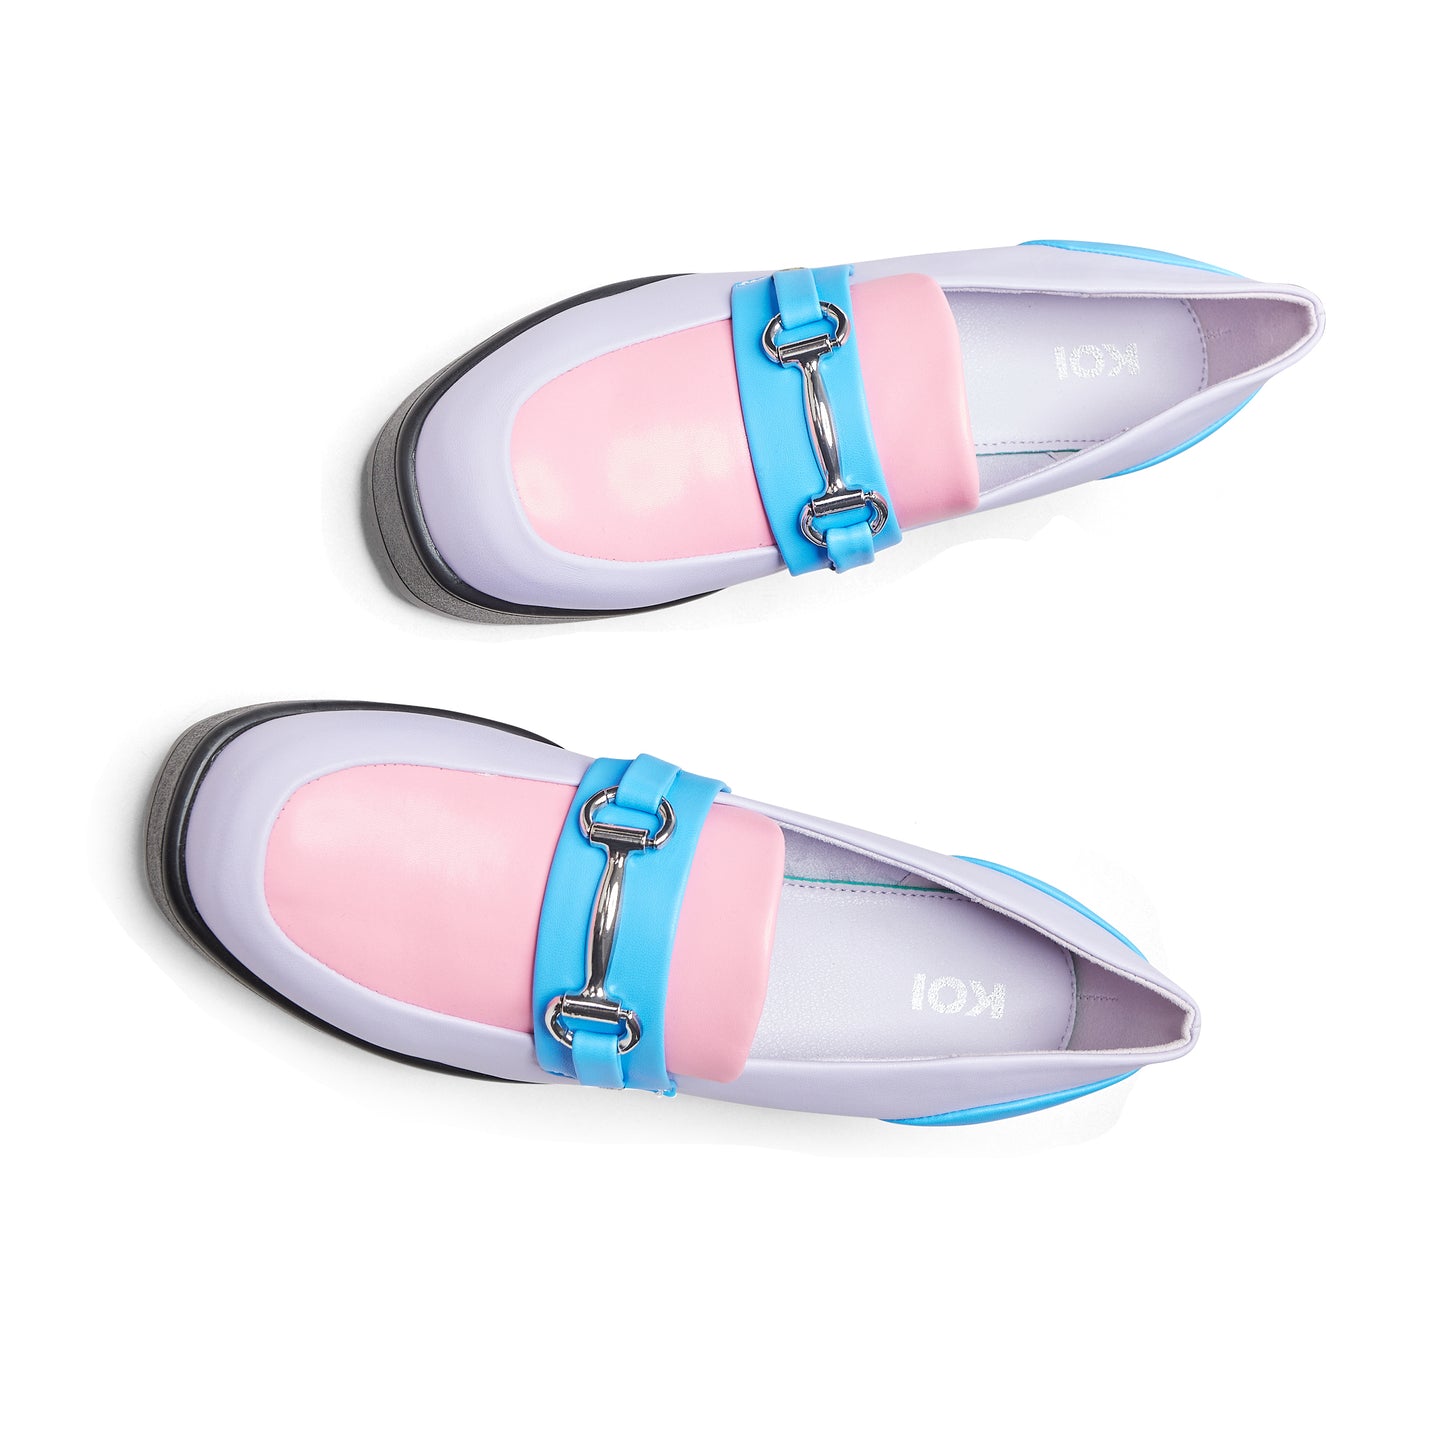 High Class Chunky Shoes - Pink Pastel - Shoes - KOI Footwear - Pink - Top View